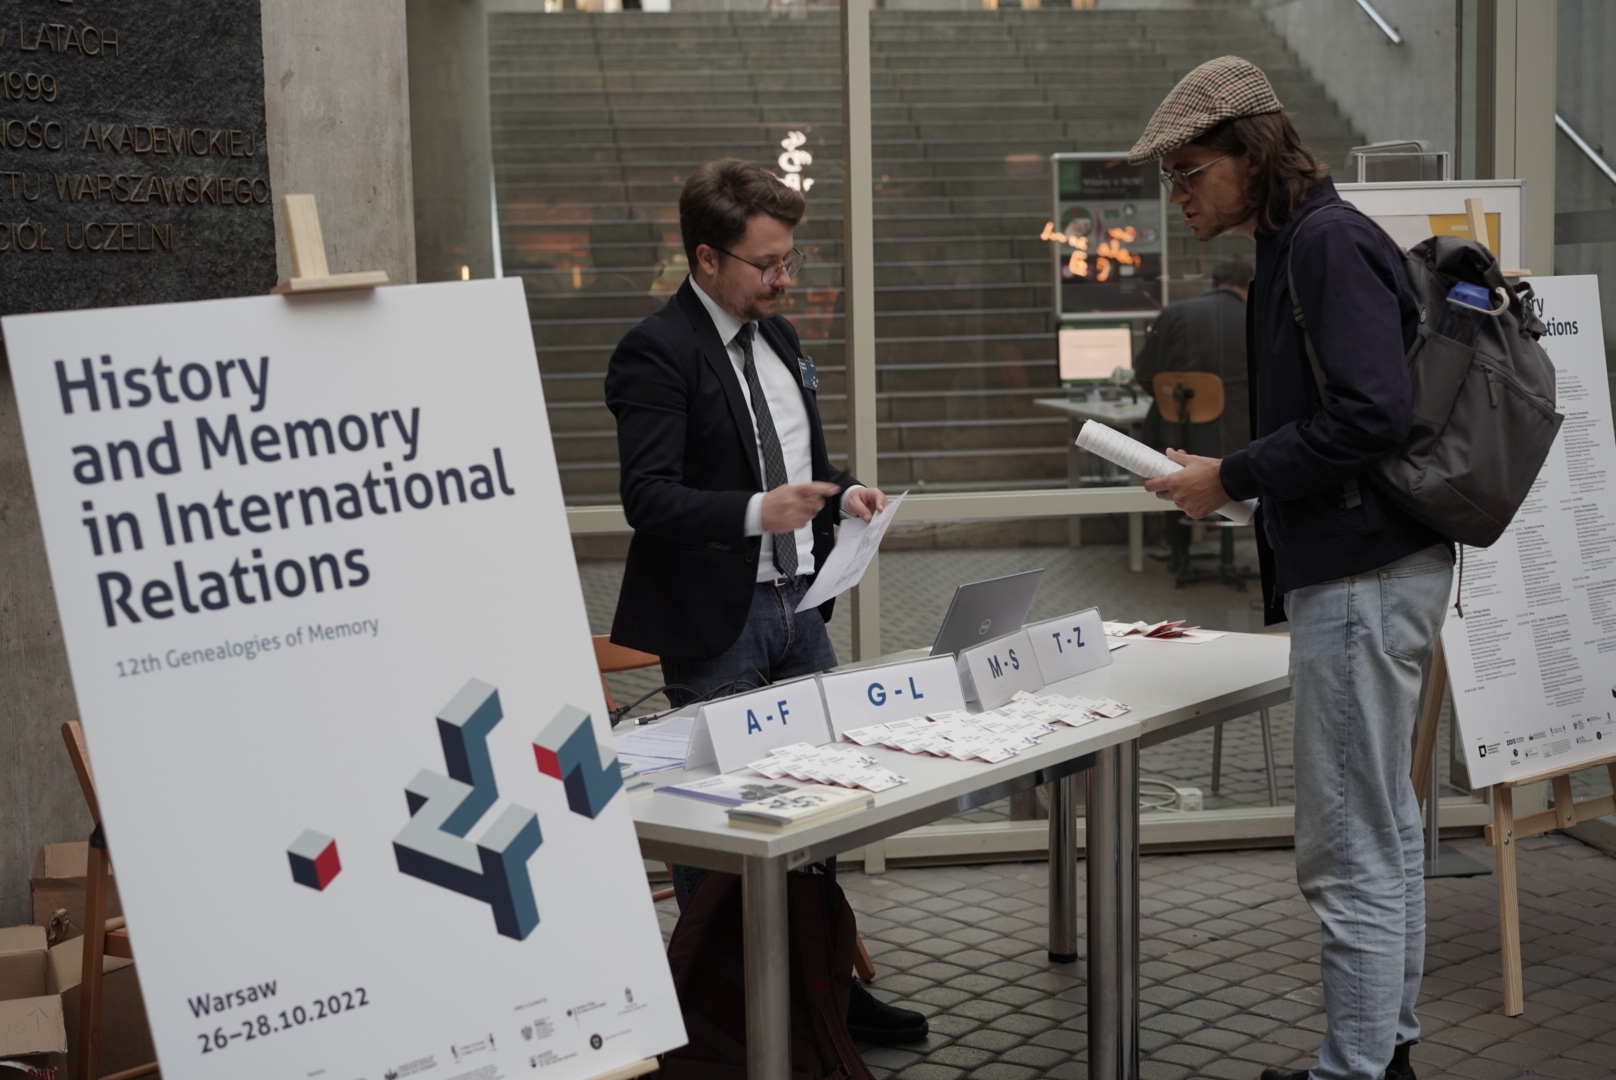 12th Genealogies of Memory conference has ended